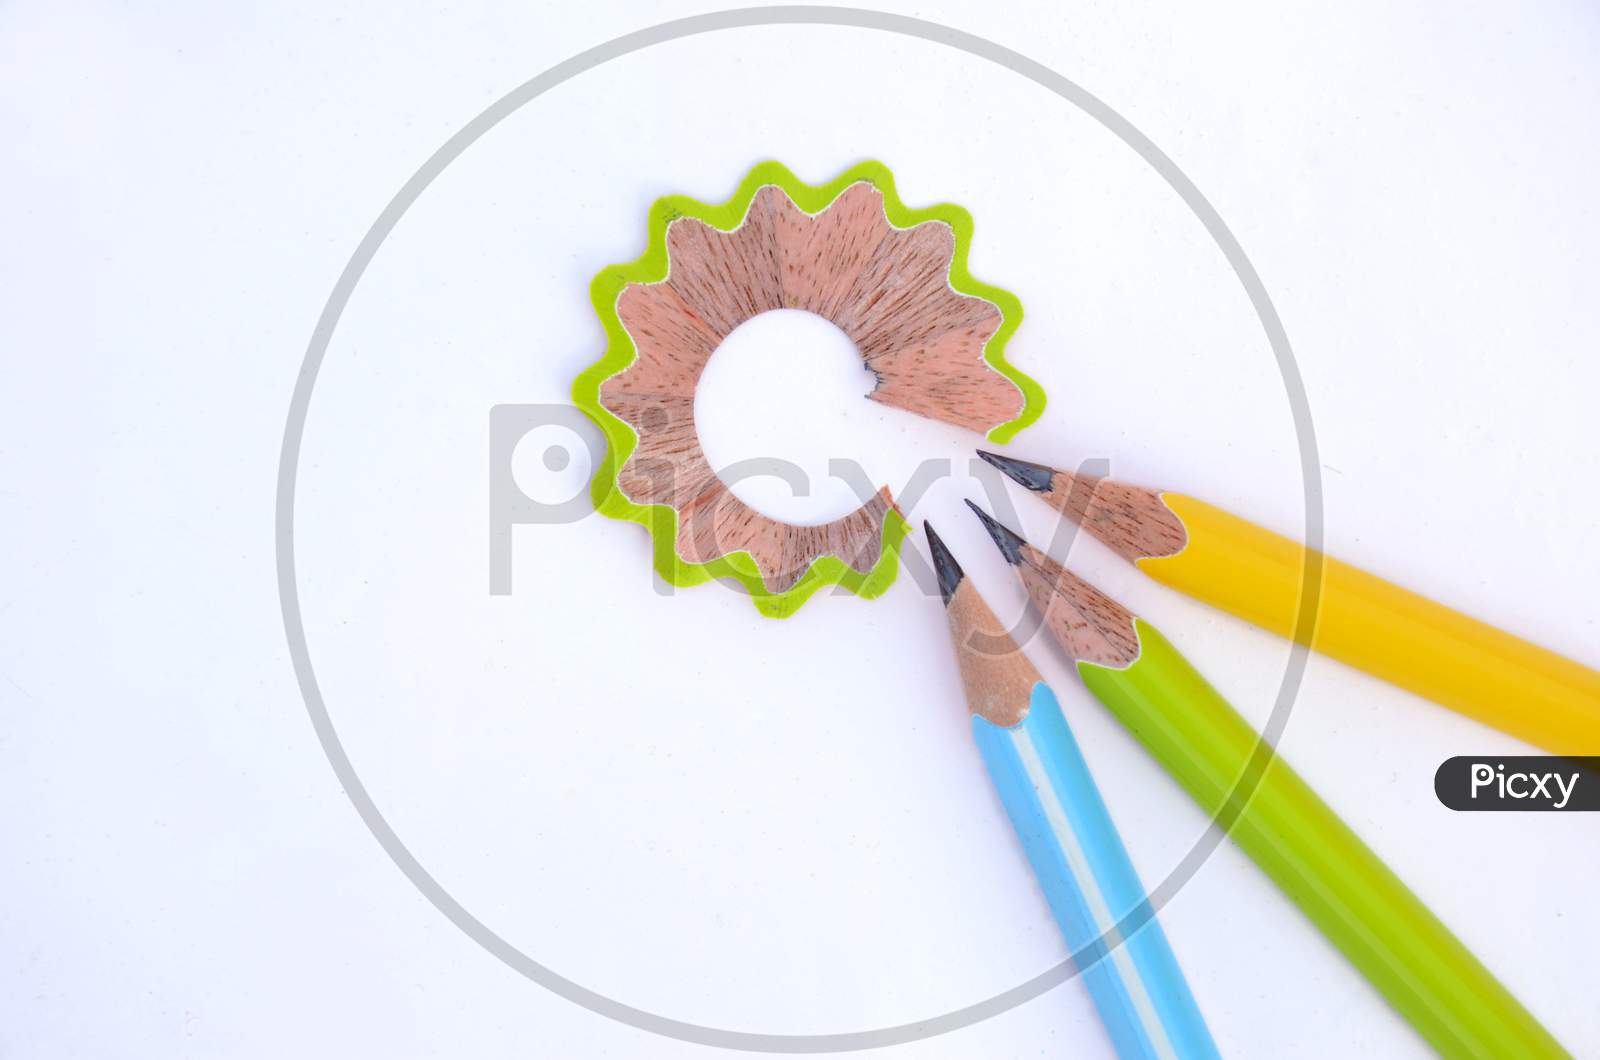 Bunch The Colorful Wooden Peels Pencils With Waste Flower Isolated On White Background.